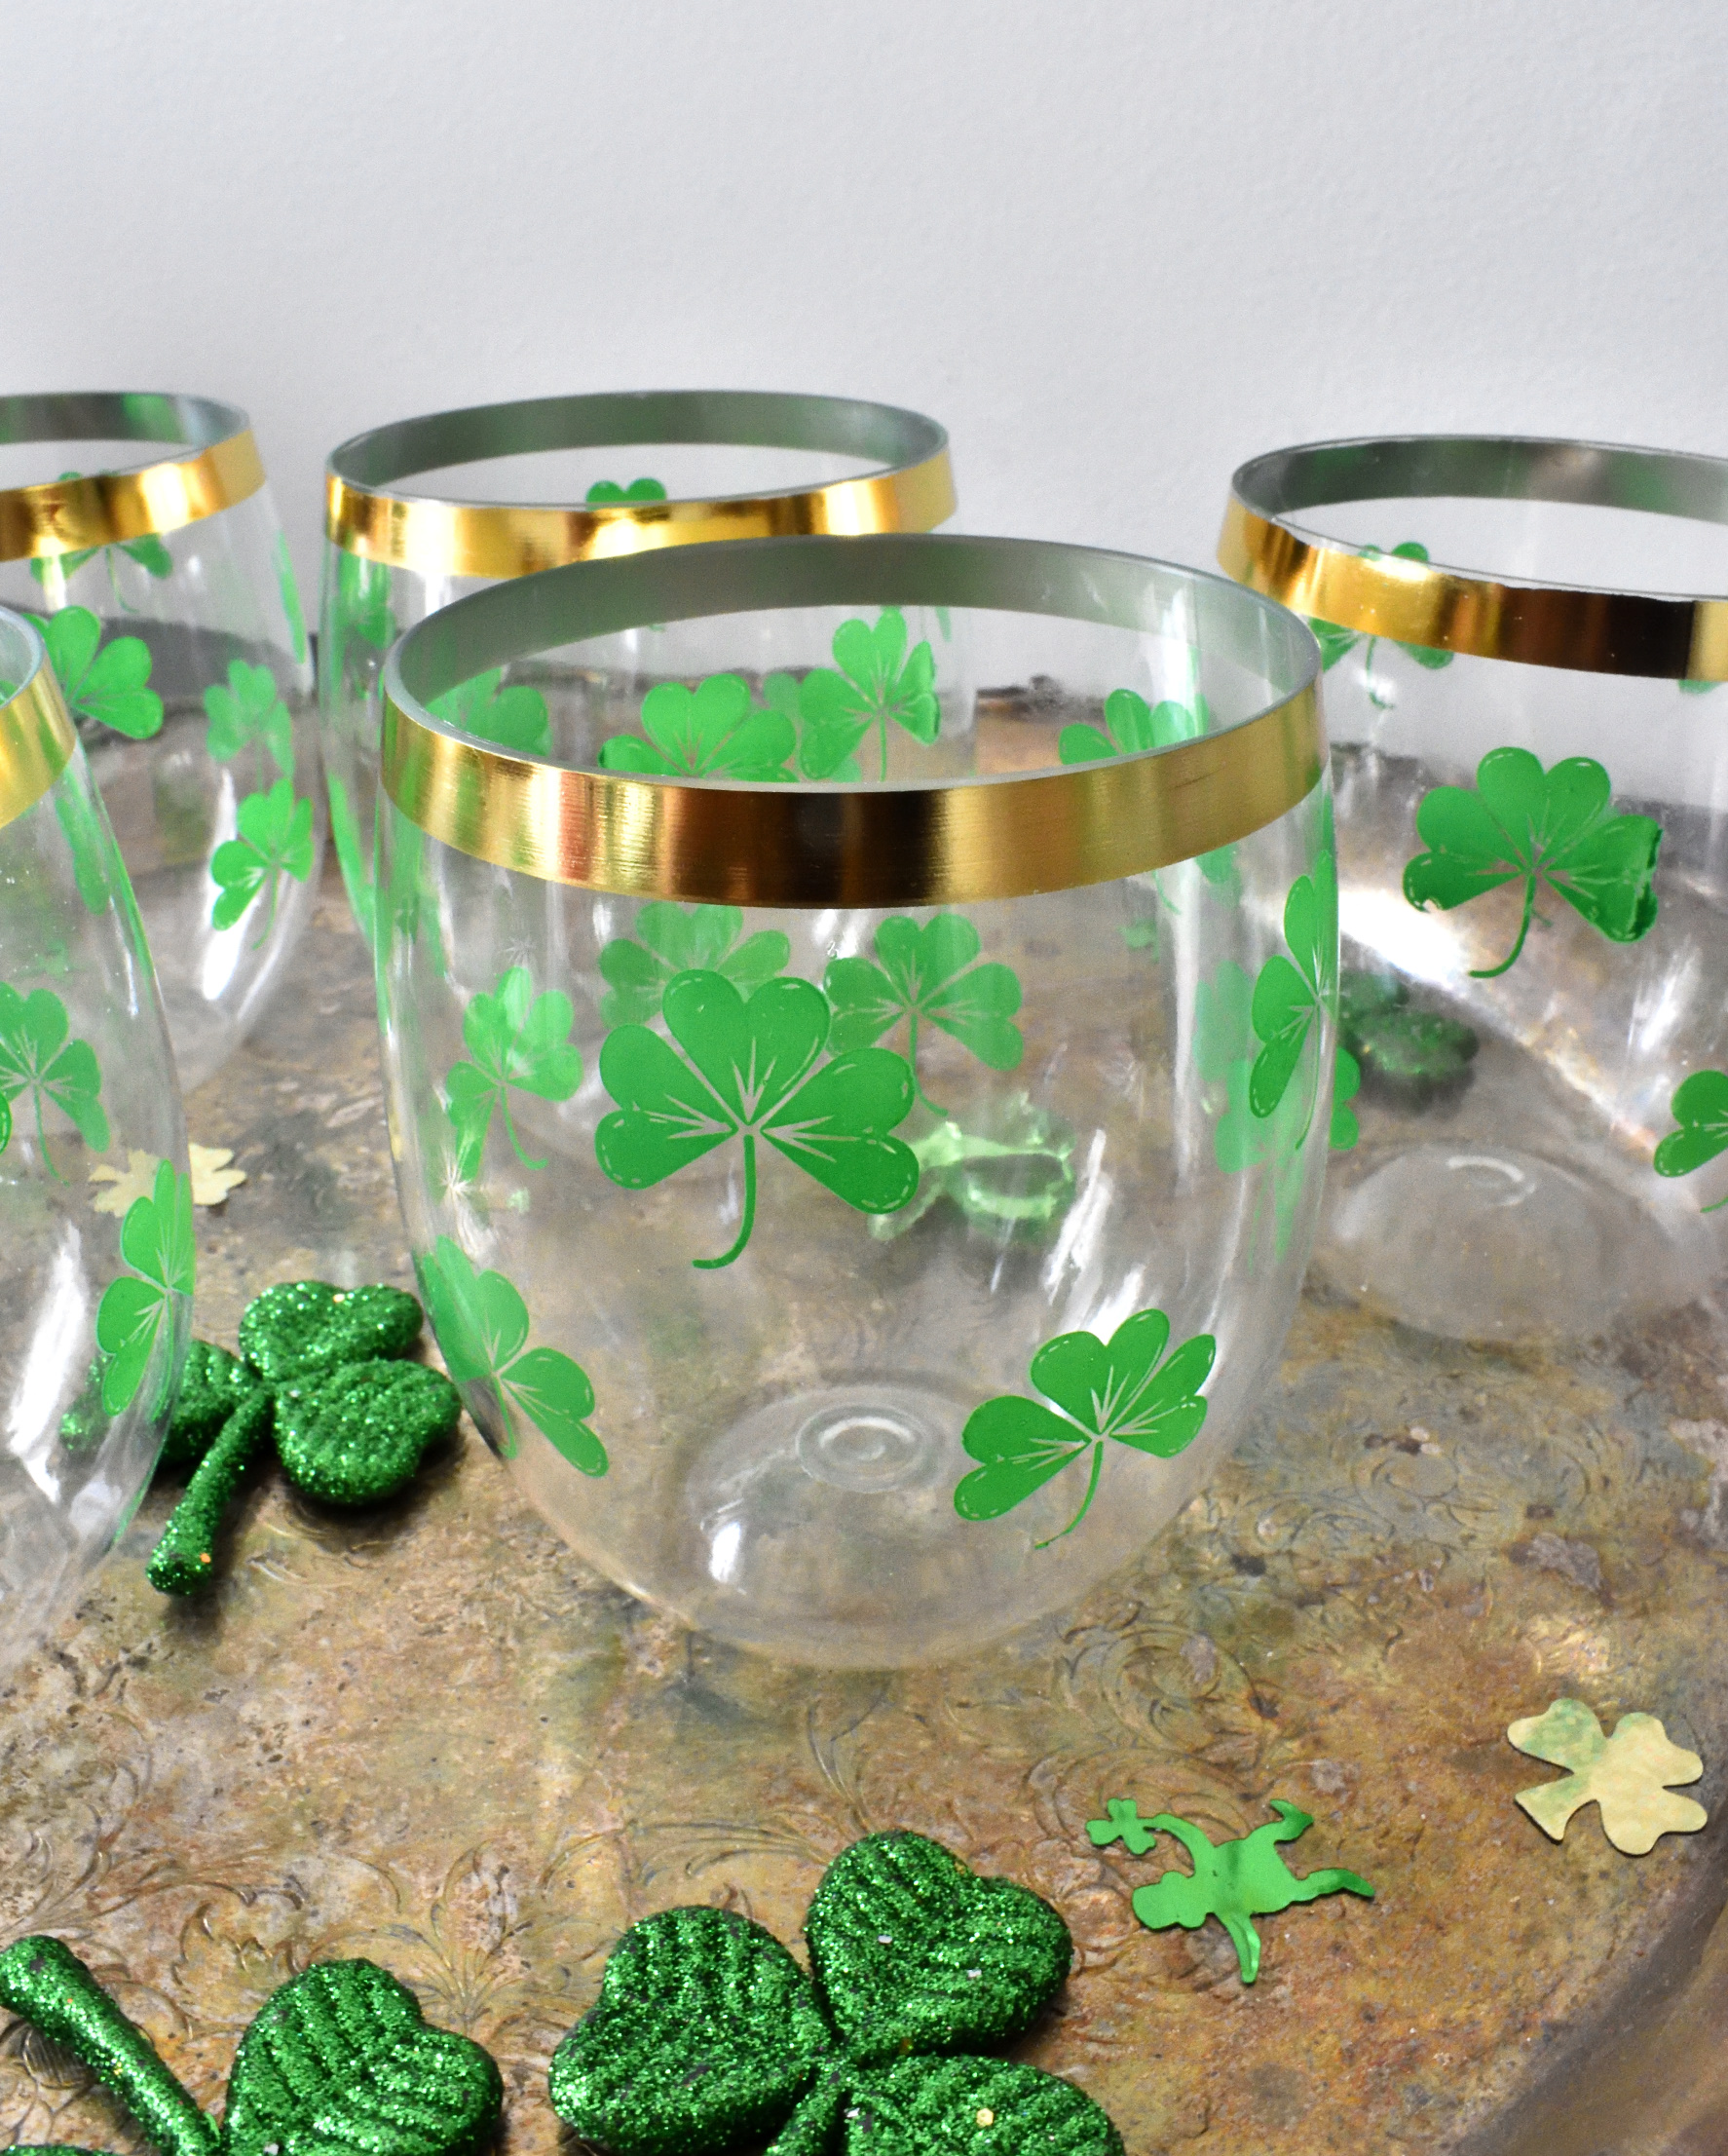 St. Paddy's Day wine glasses